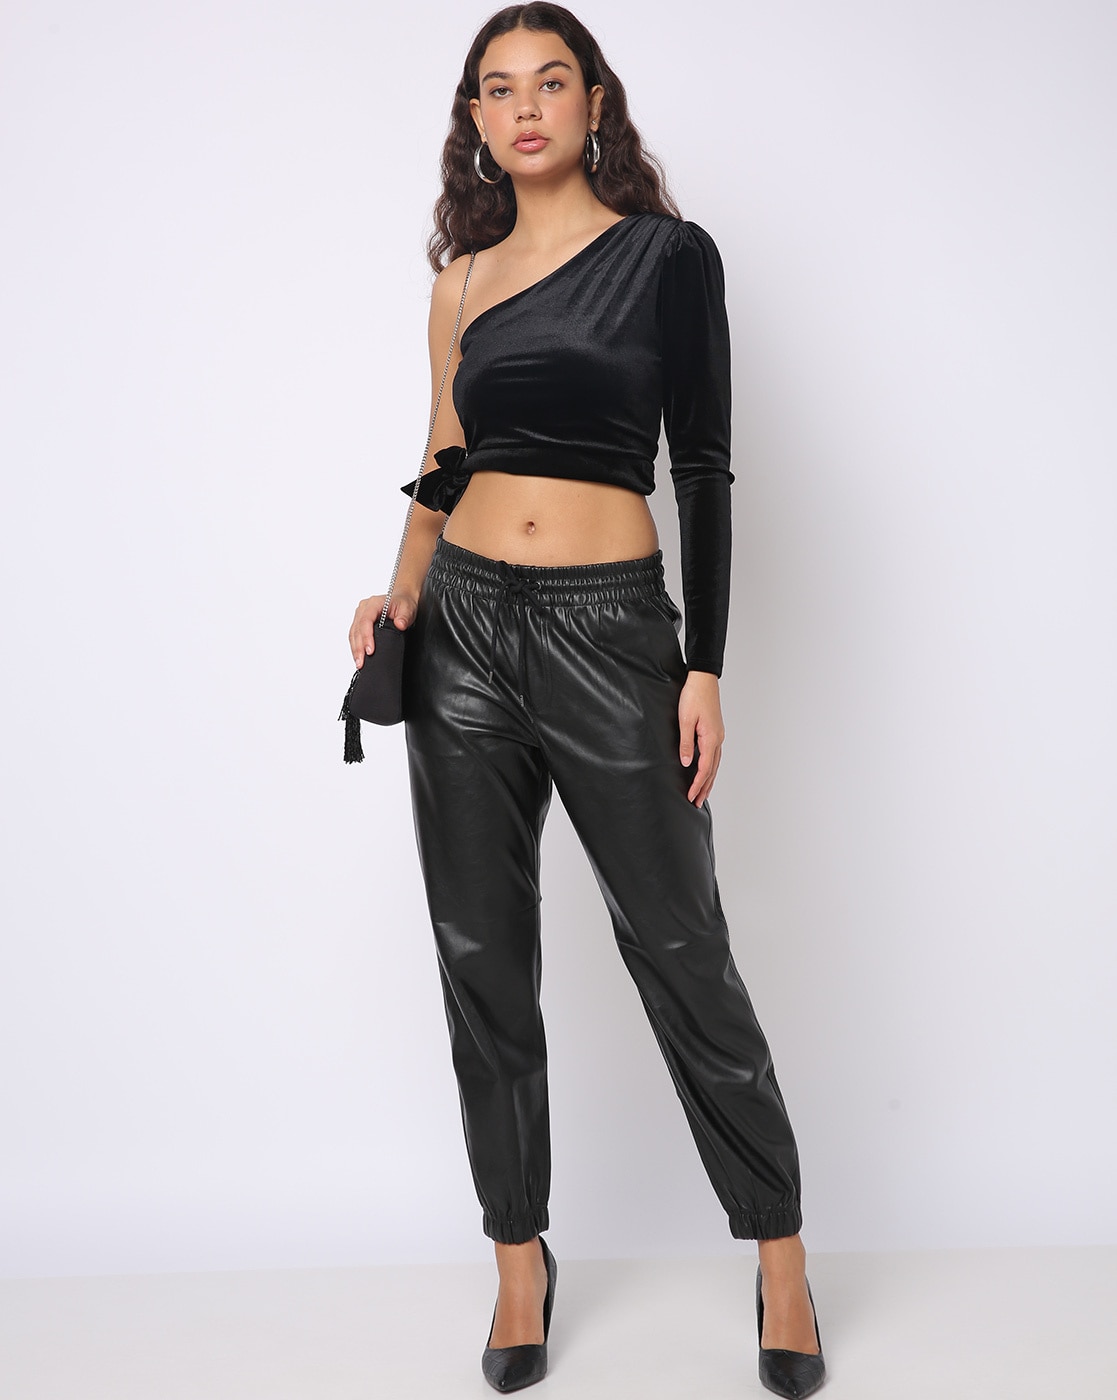 DKNY Black Faux Leather Flare Pants for Women Online India at Darveyscom